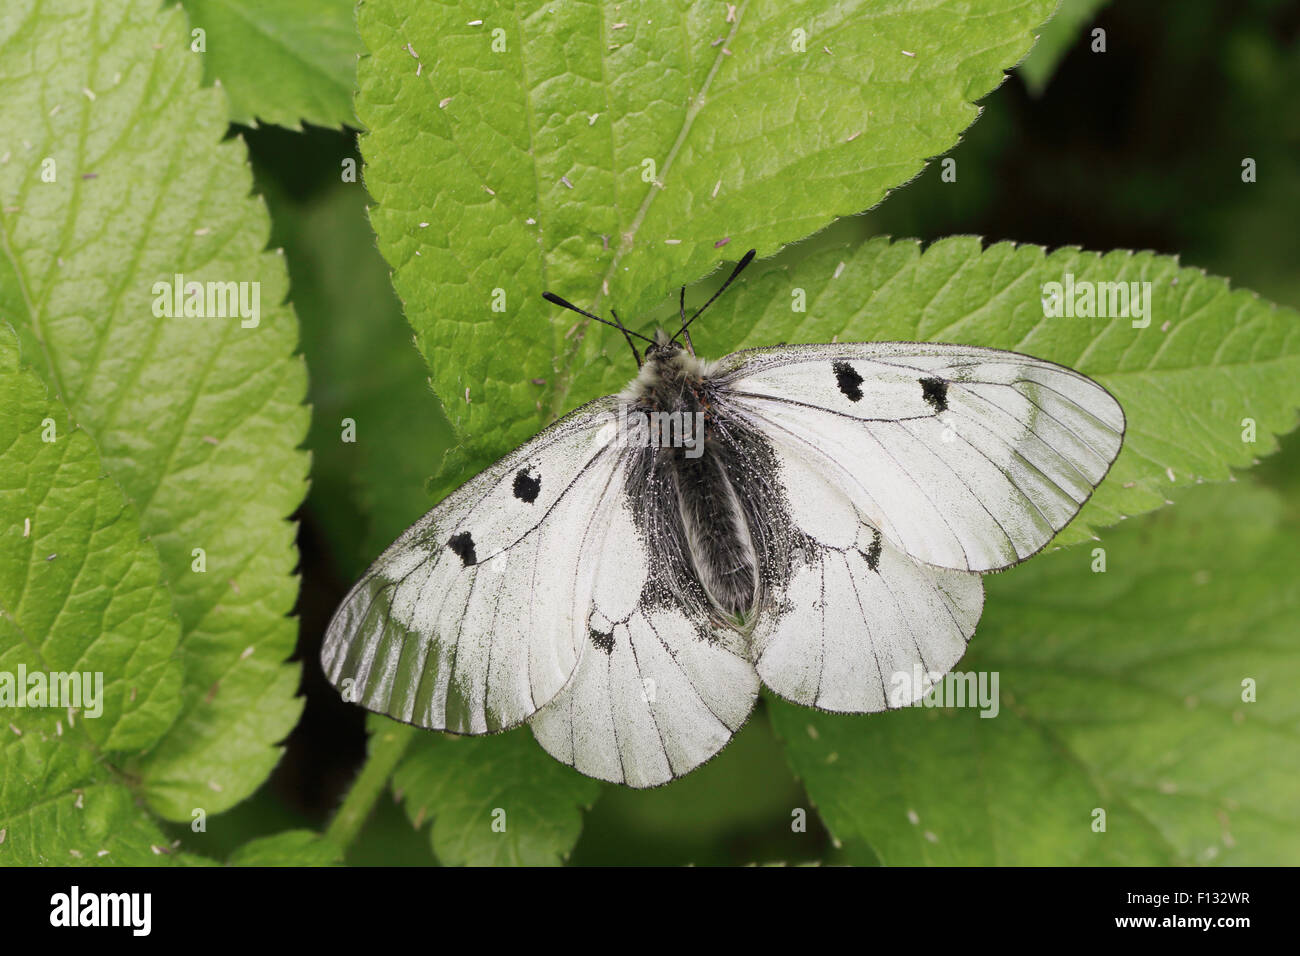 Clouded Apollo (Parnassius mnemosyne). The species is listed as NT (Near Threatened) in the IUCN global red list. Stock Photo